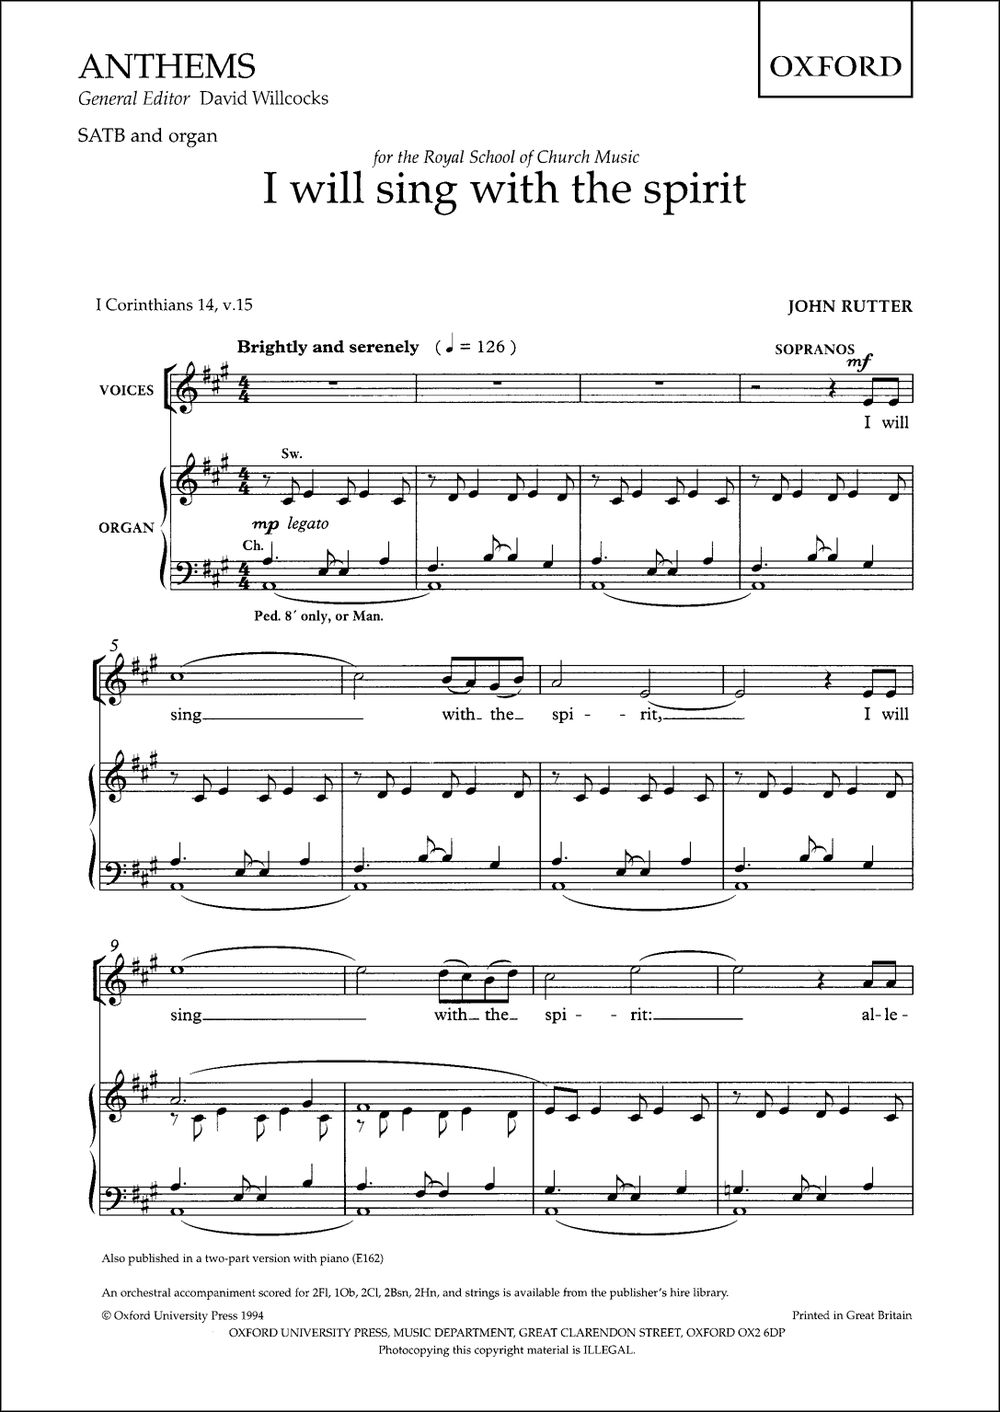 Alan Smith: Love is come again: Mixed Choir: Vocal Score